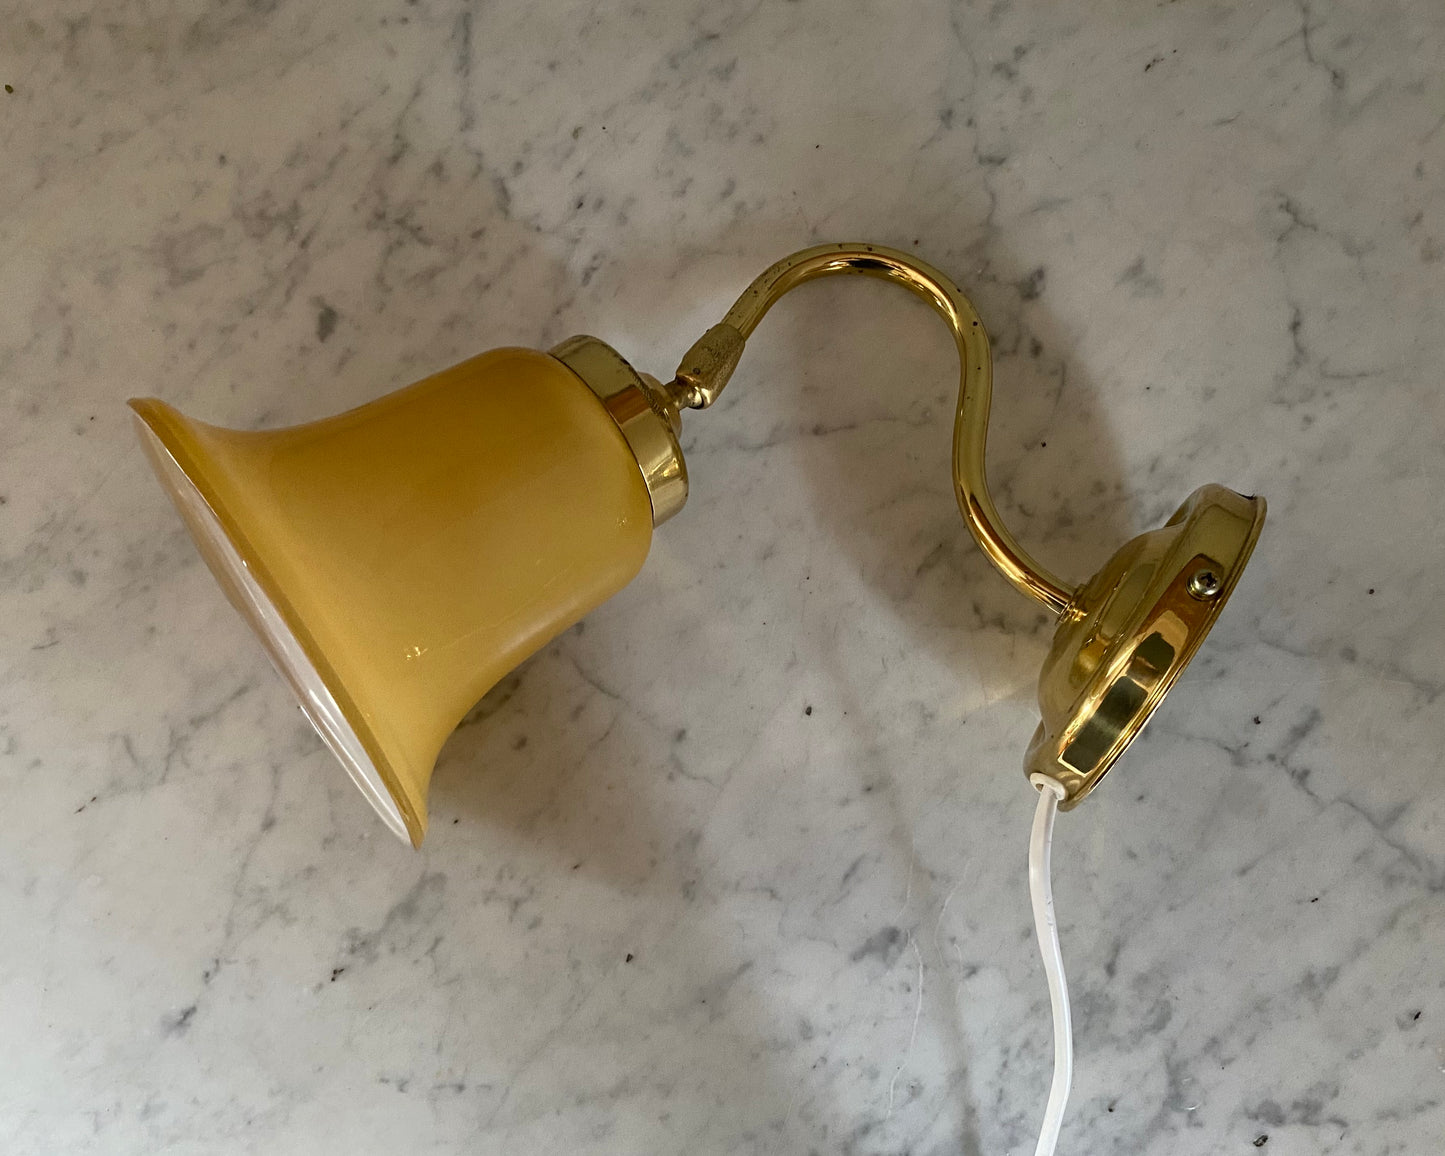 Vintage wall light with glass shade